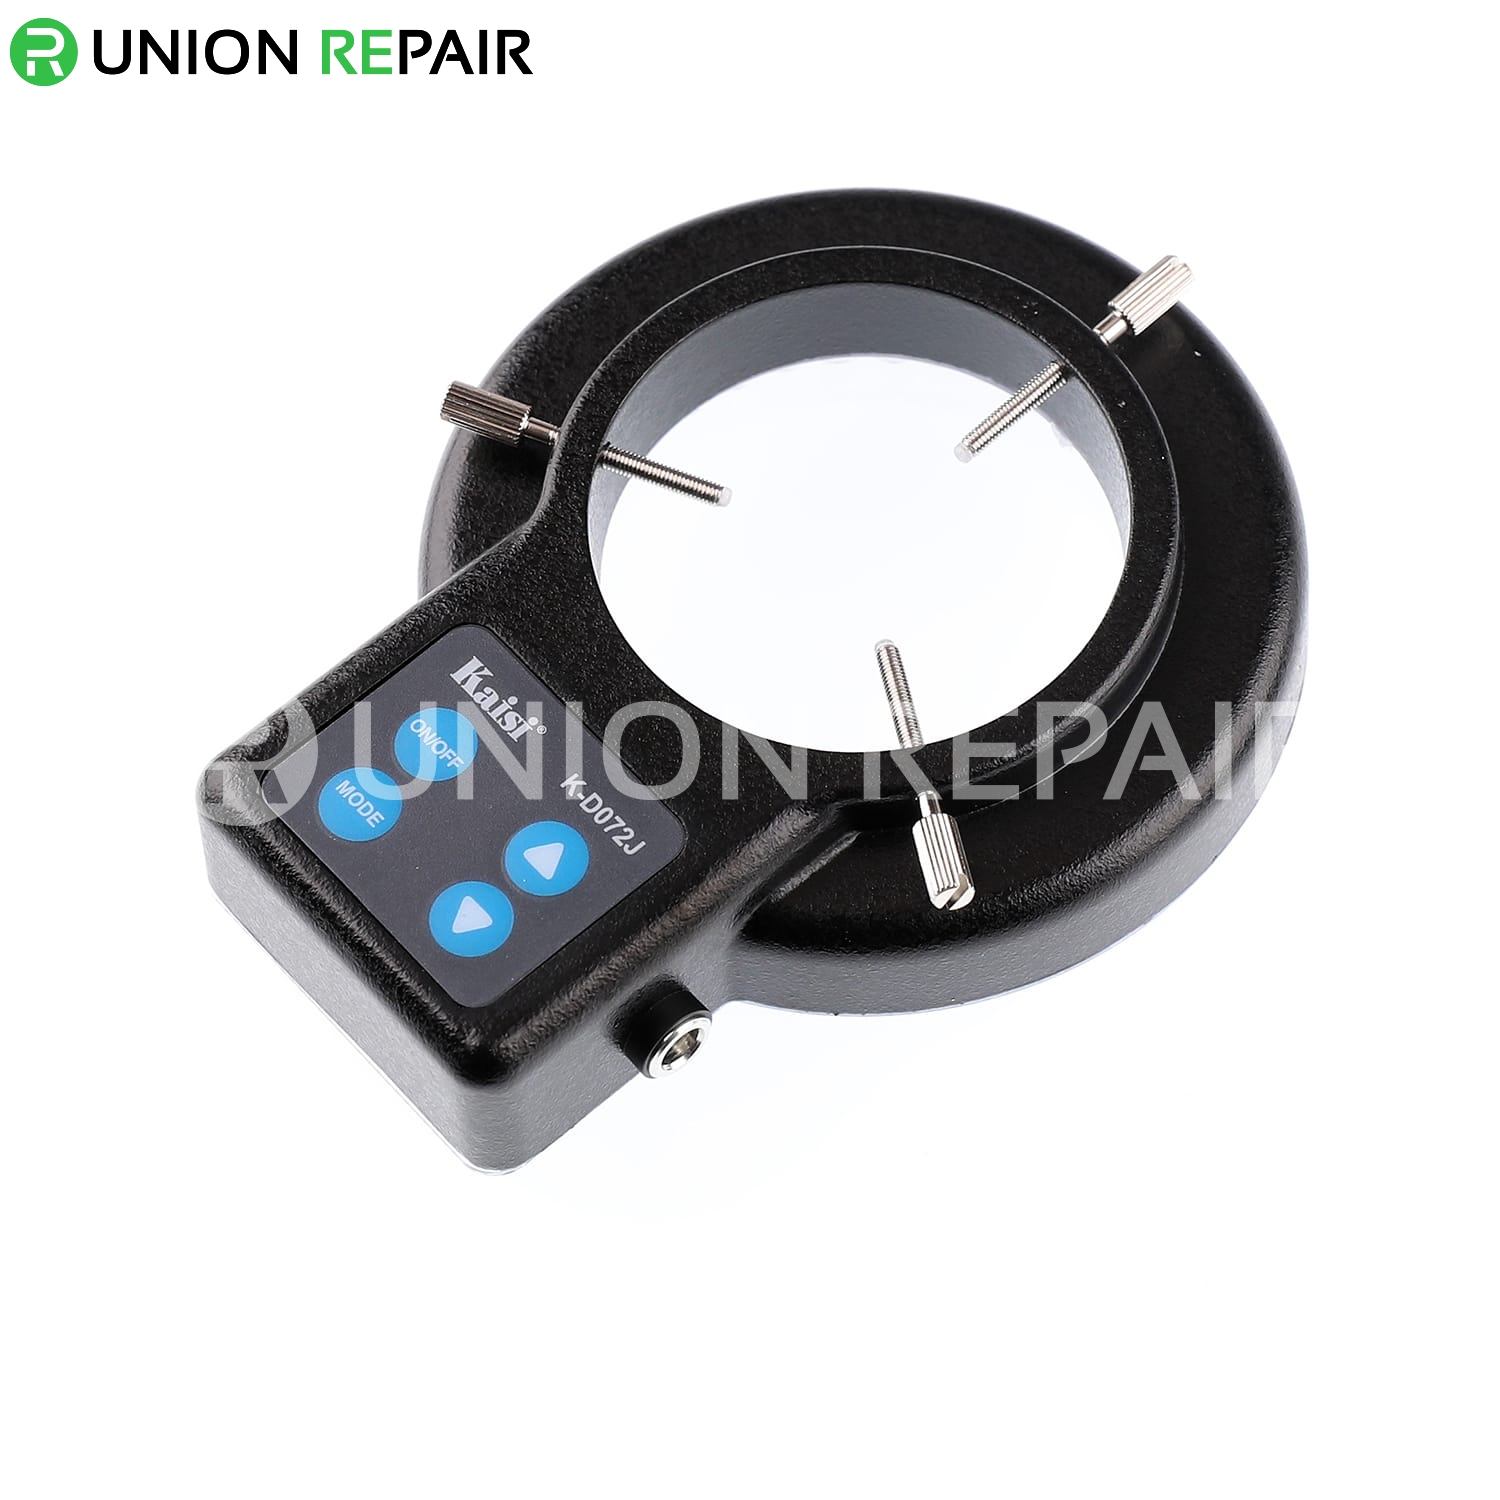 10 Inch Table Top LED Adjustable Ring Light | ValueLights